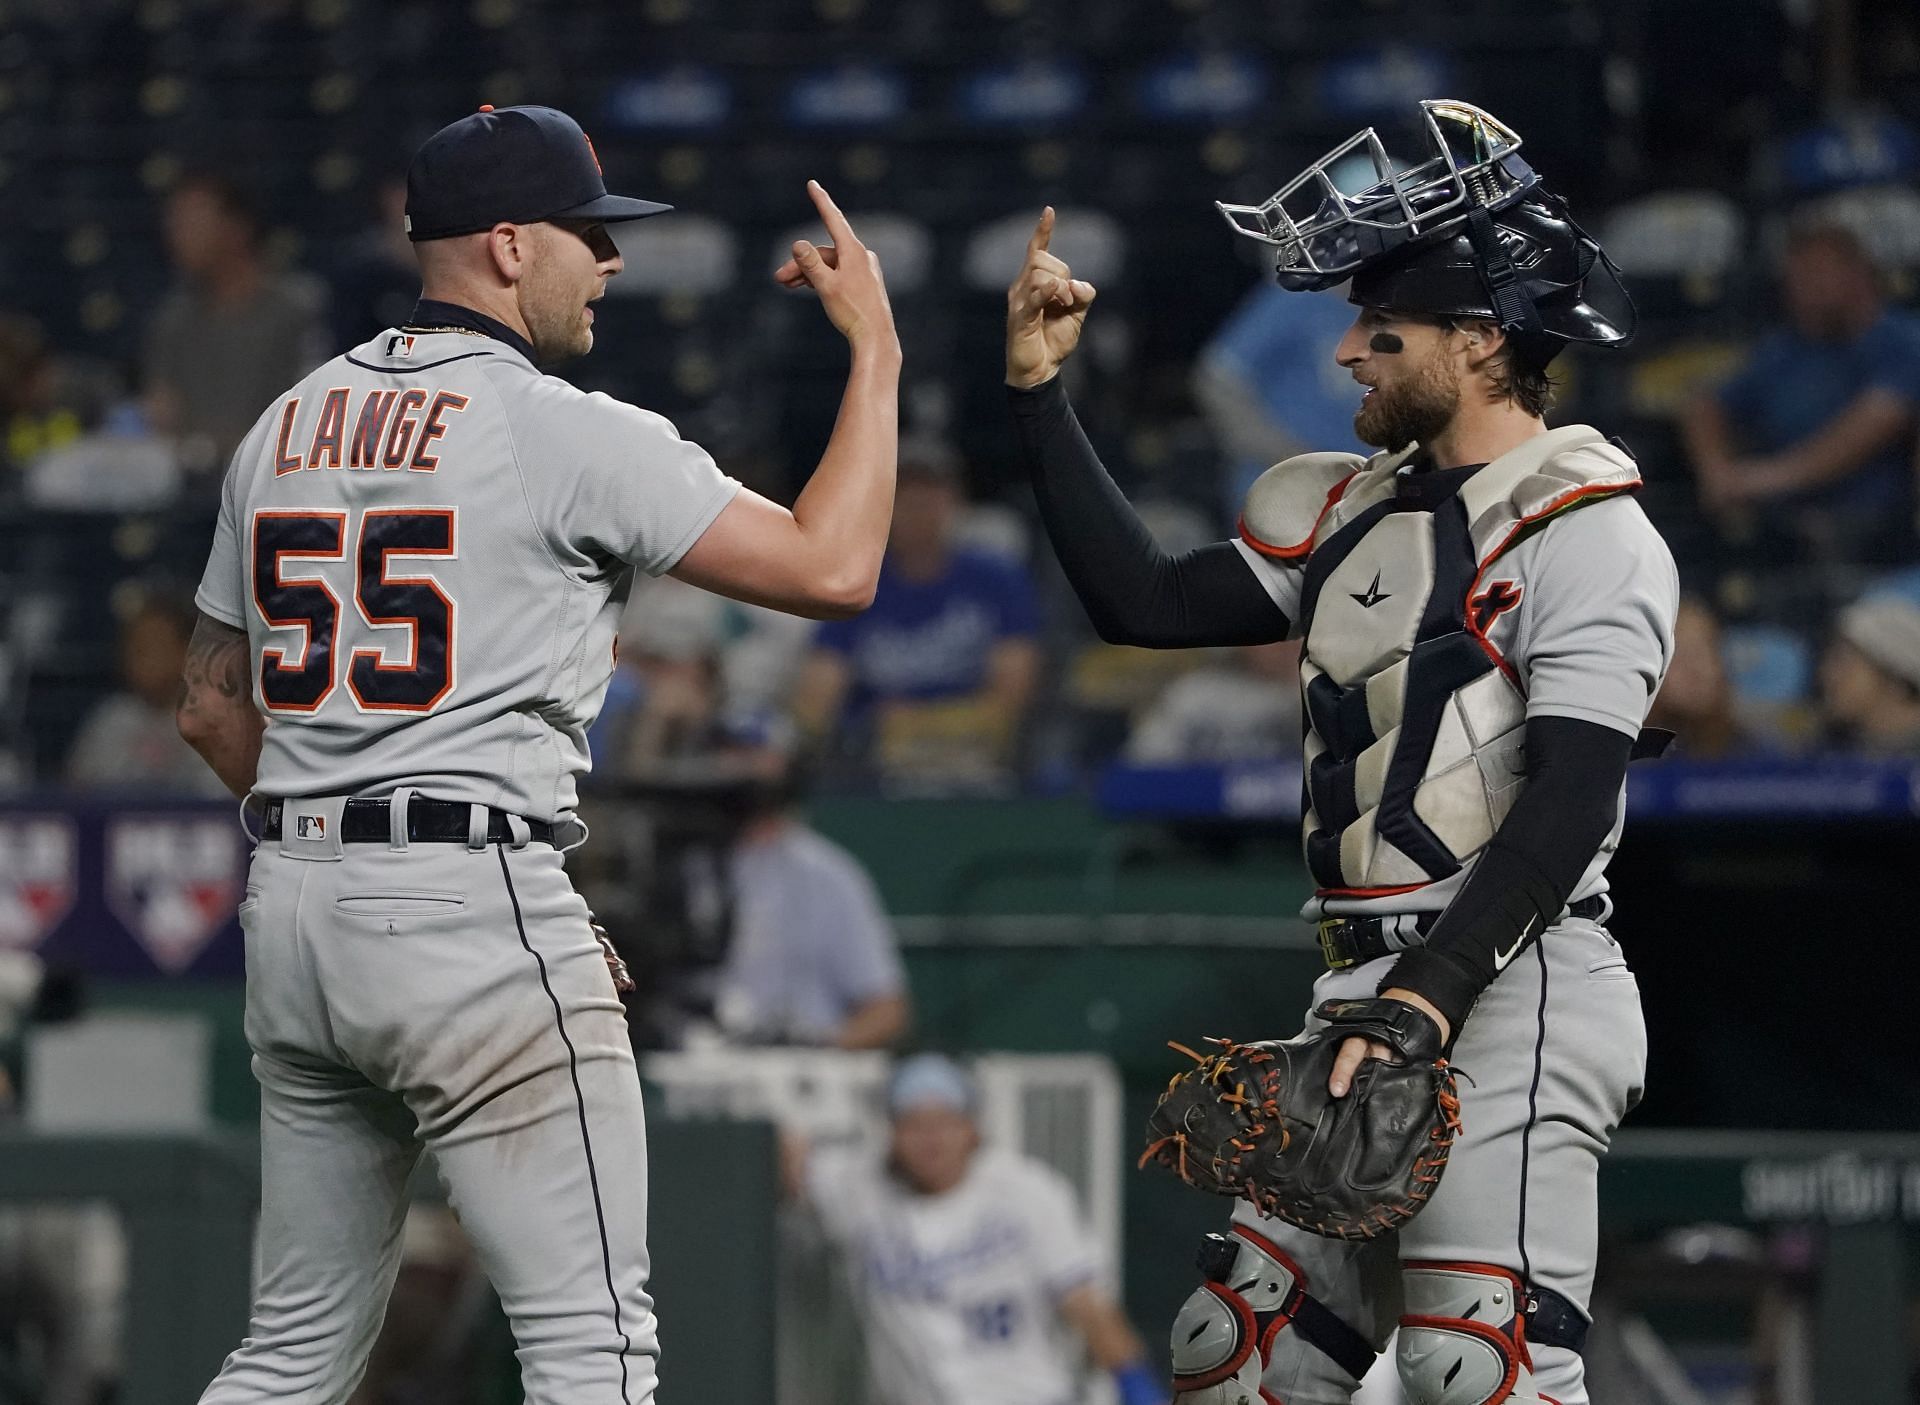 Detroit Tigers to Sport Meijer Ads on Sleeves as Part of Expanded